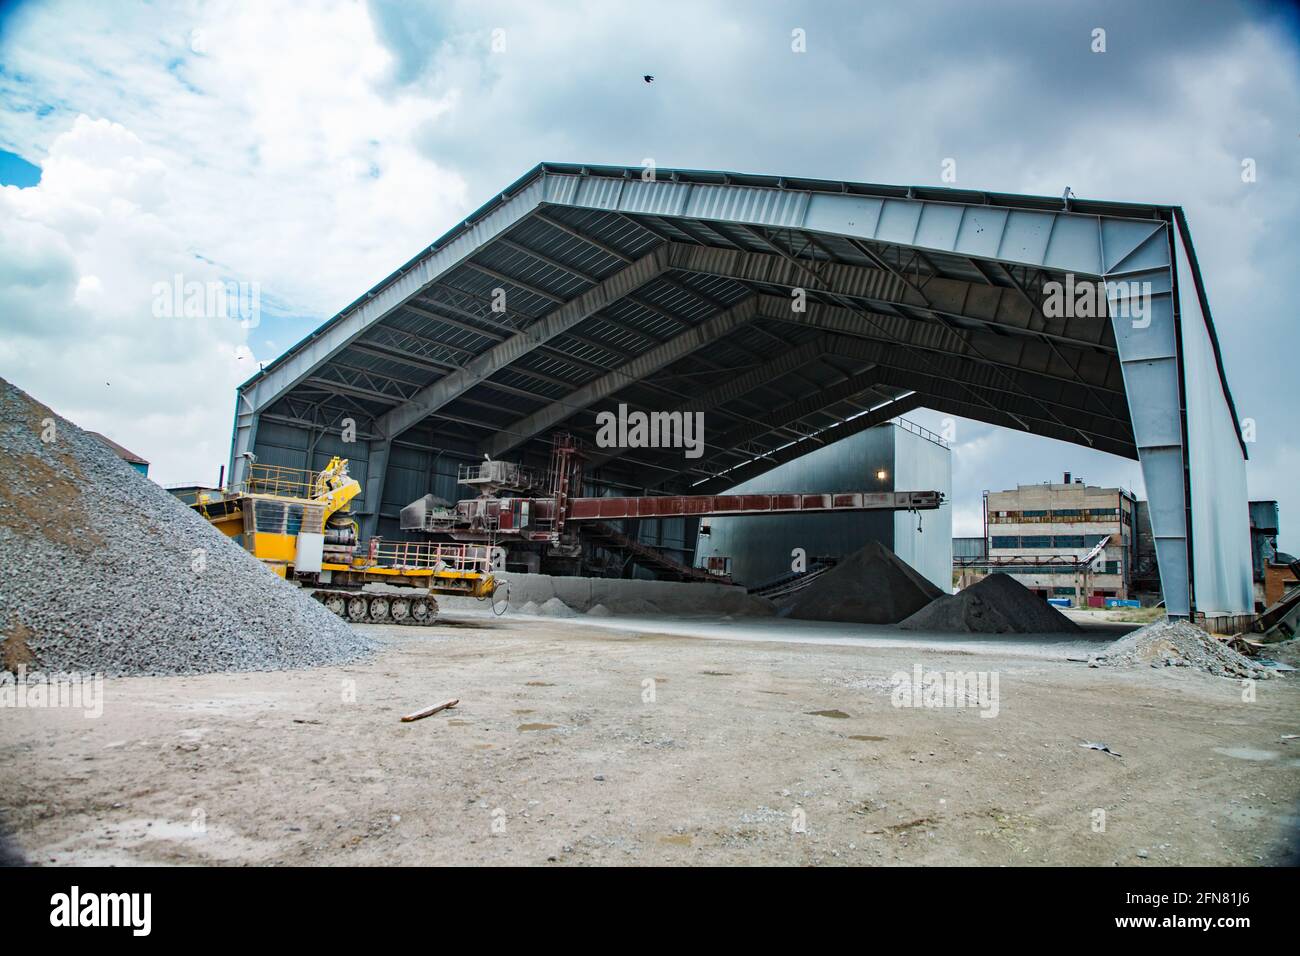 Temirtau, Kazakhstan - June 09, 2012: Old outdated Soviet cement plant. Storage of raw materials. Loading machine under the roof and heaps of stones. Stock Photo